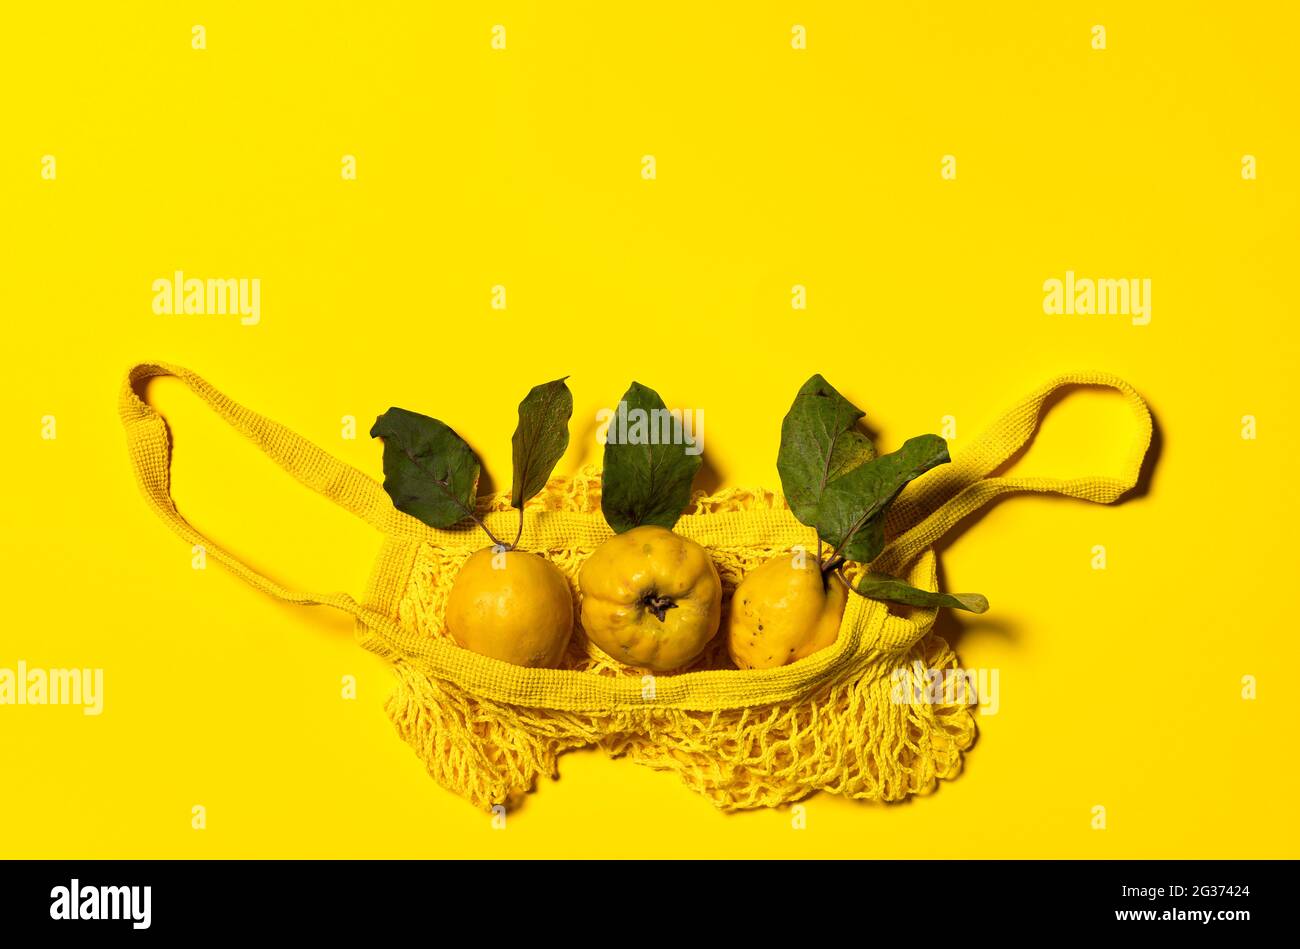 Three quince apples with natural leaves and yellow net string shopping bag. Flat lay on yellow paper background. Fruits and leaves have natural imperf Stock Photo